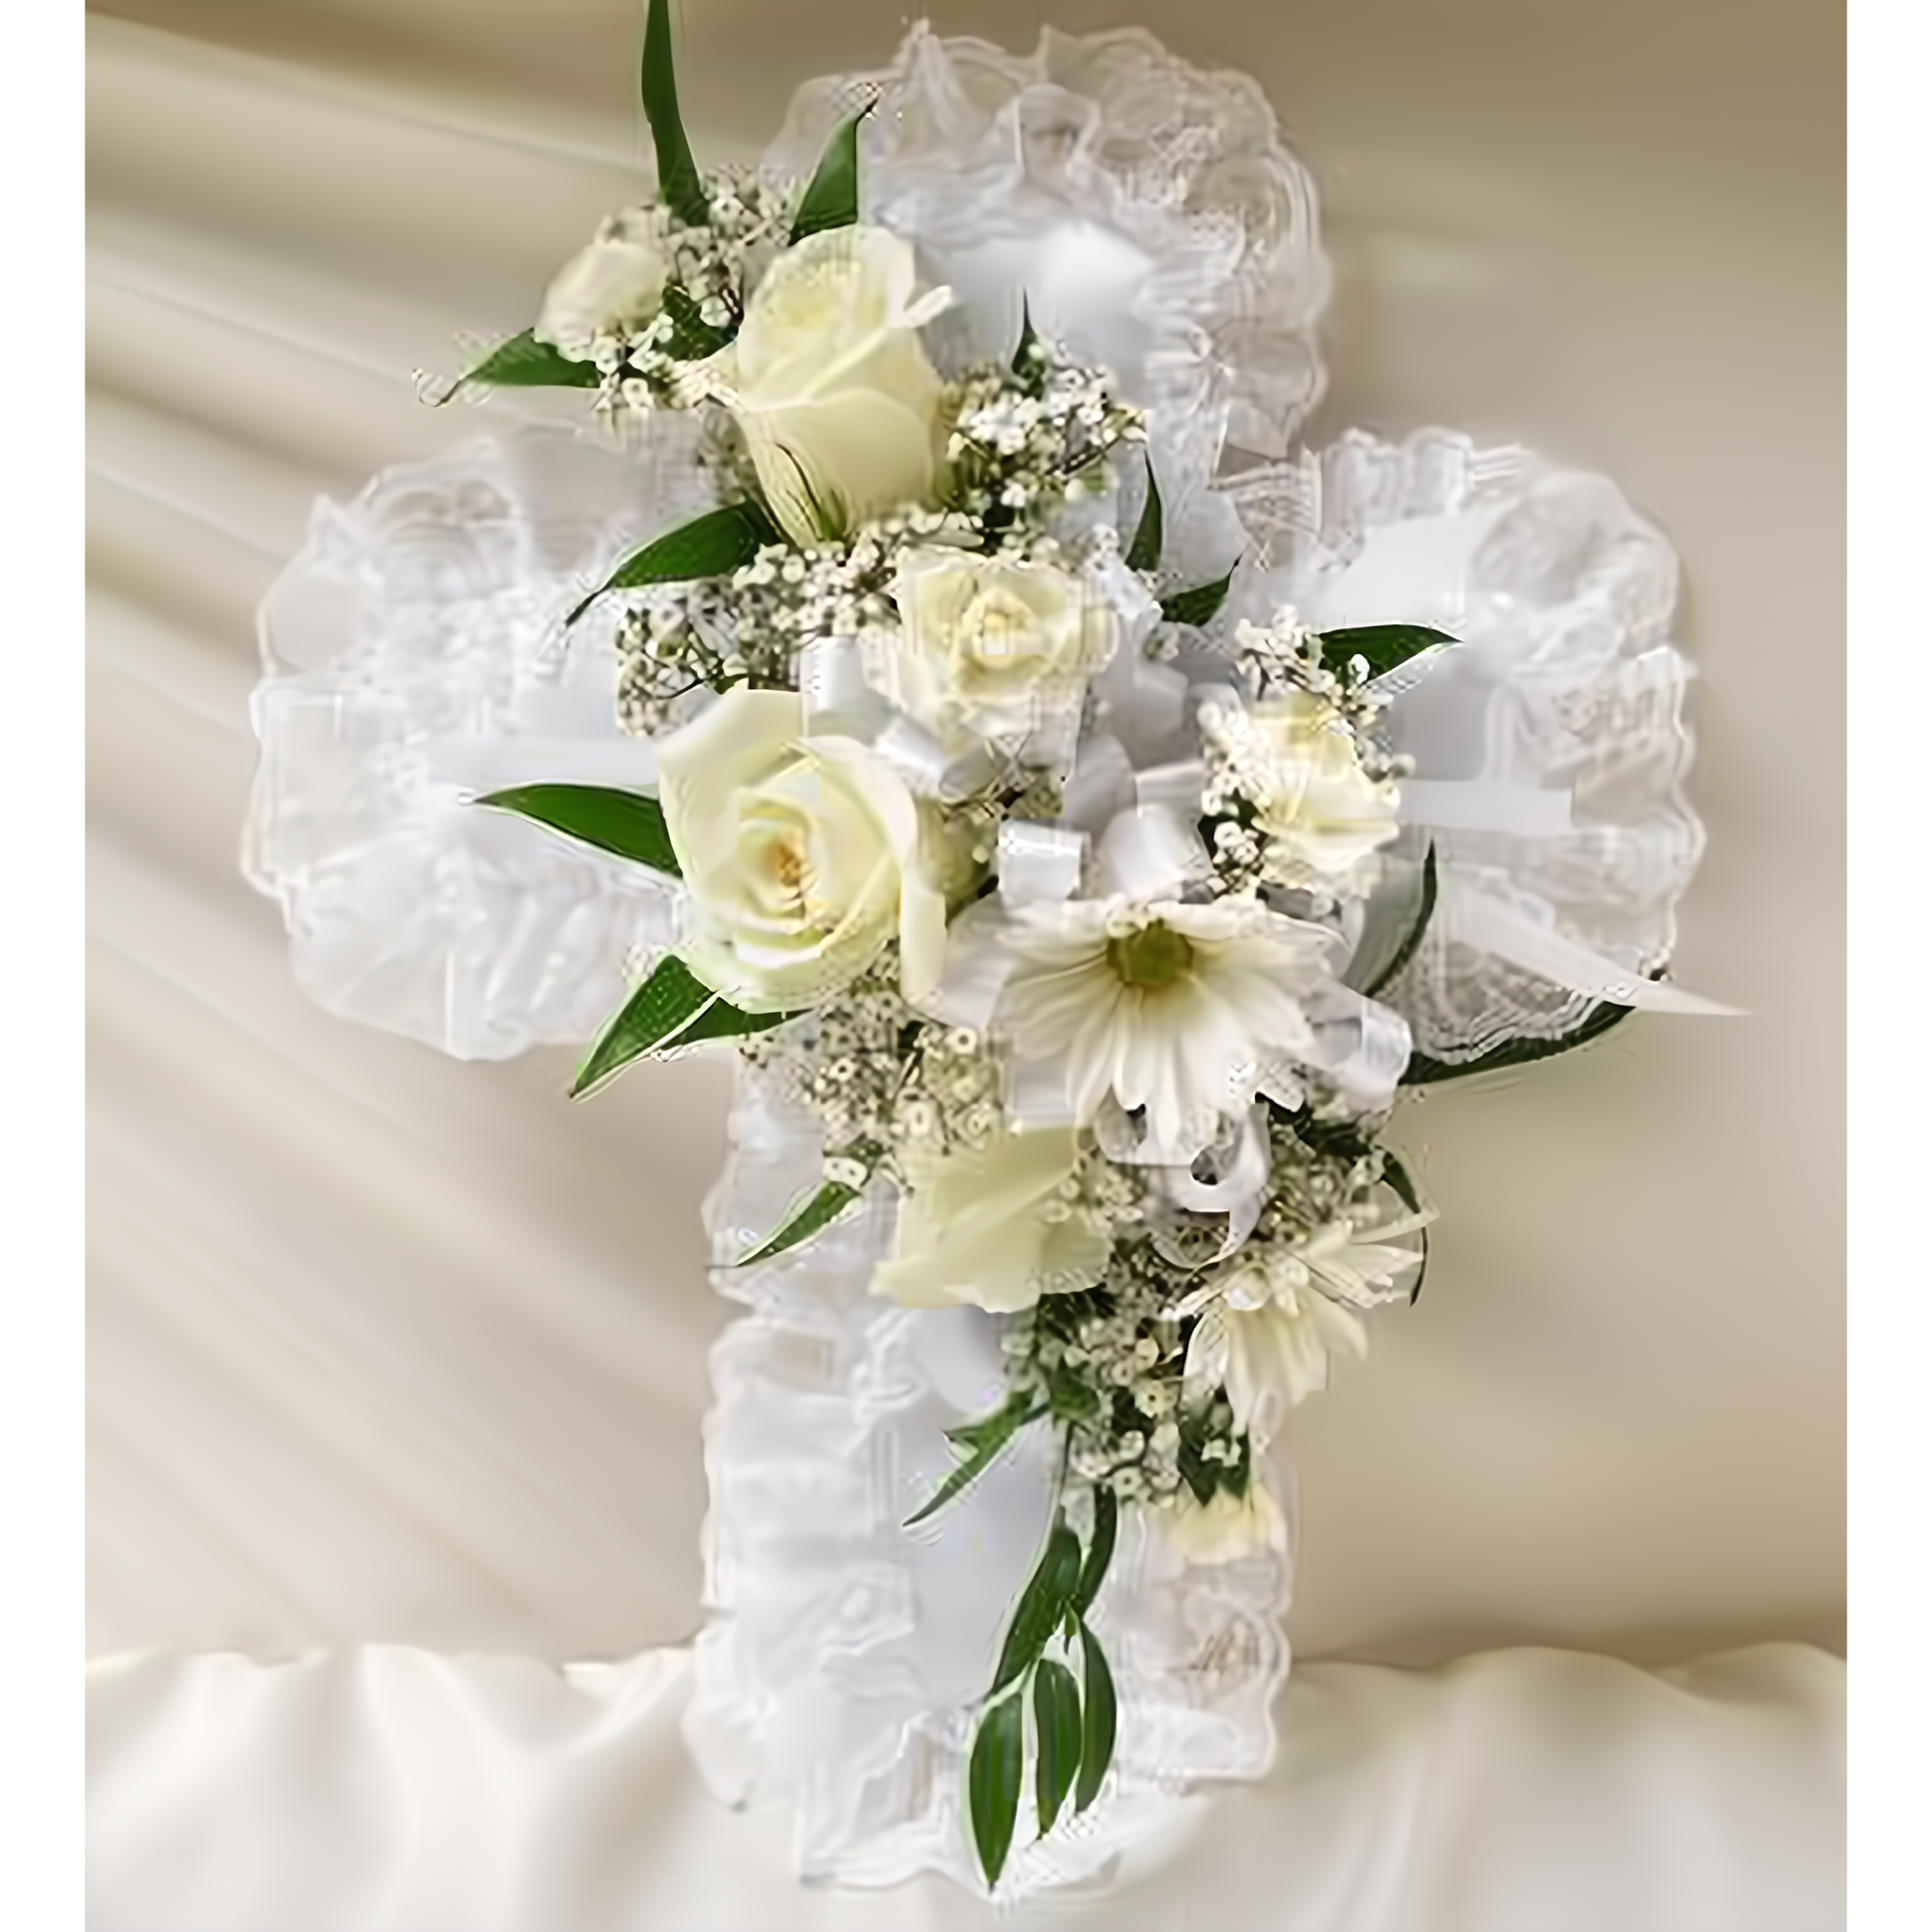 NYC Flower Delivery - White Satin Cross Casket Pillow - Funeral > Casket Sprays